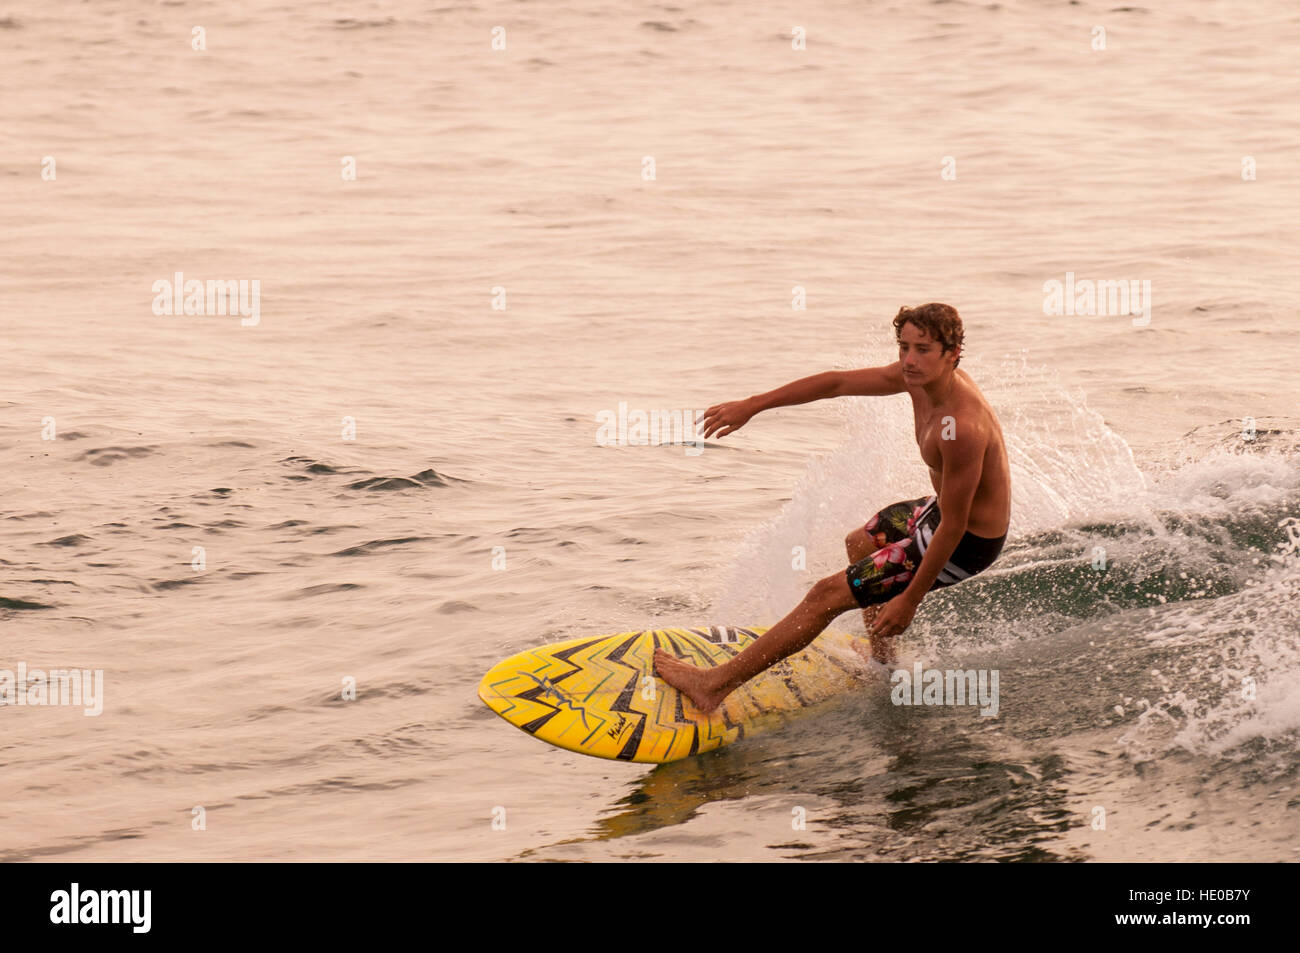 Surfing in Turtle Bay, North Shore, Oahu, Hawaii. Stock Photo